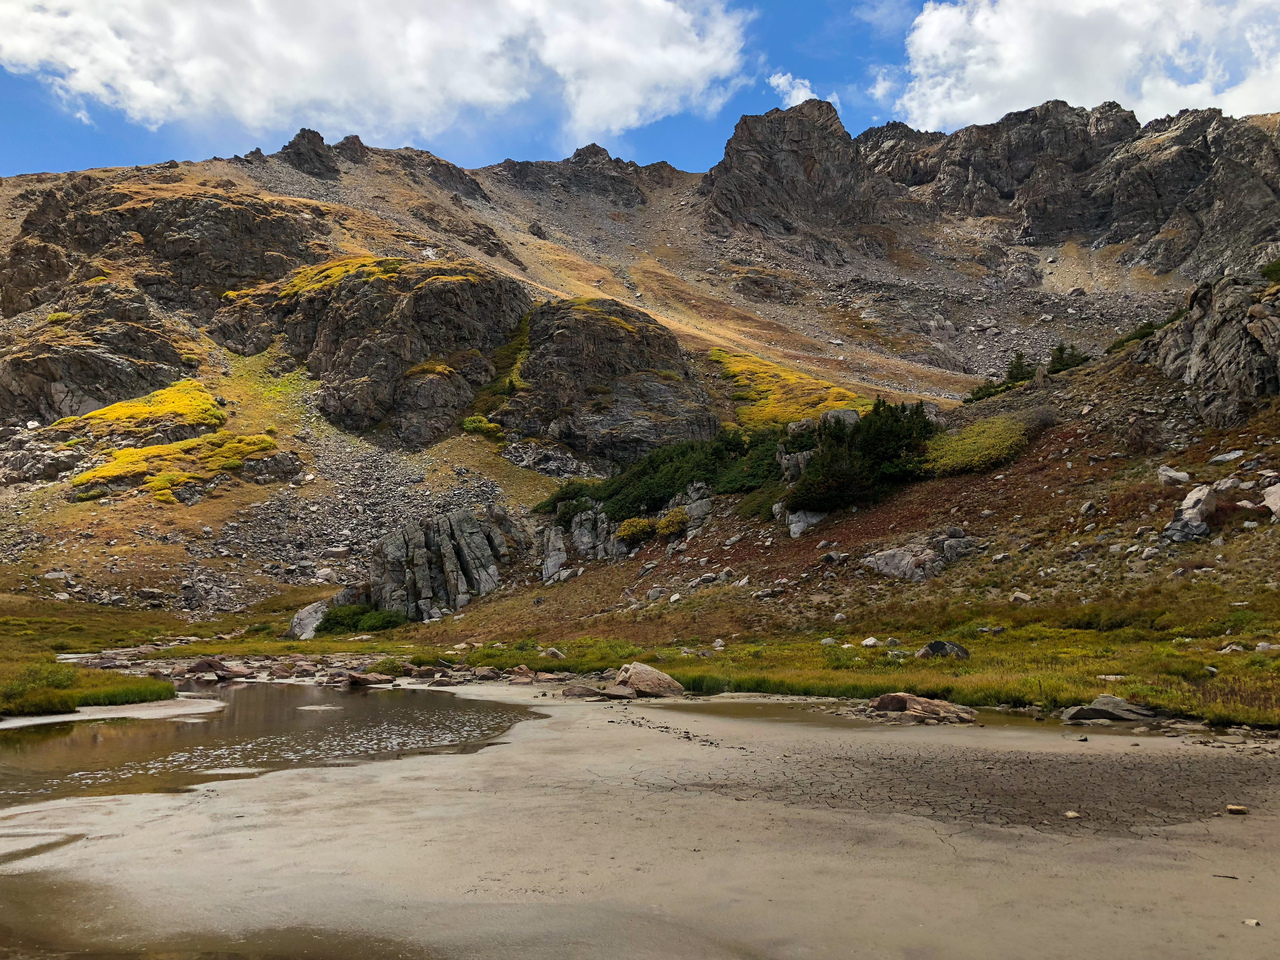 2018-herman-gulch - Lots of thick mud near the top. Herman Gulch, Colorado. September, 2018.